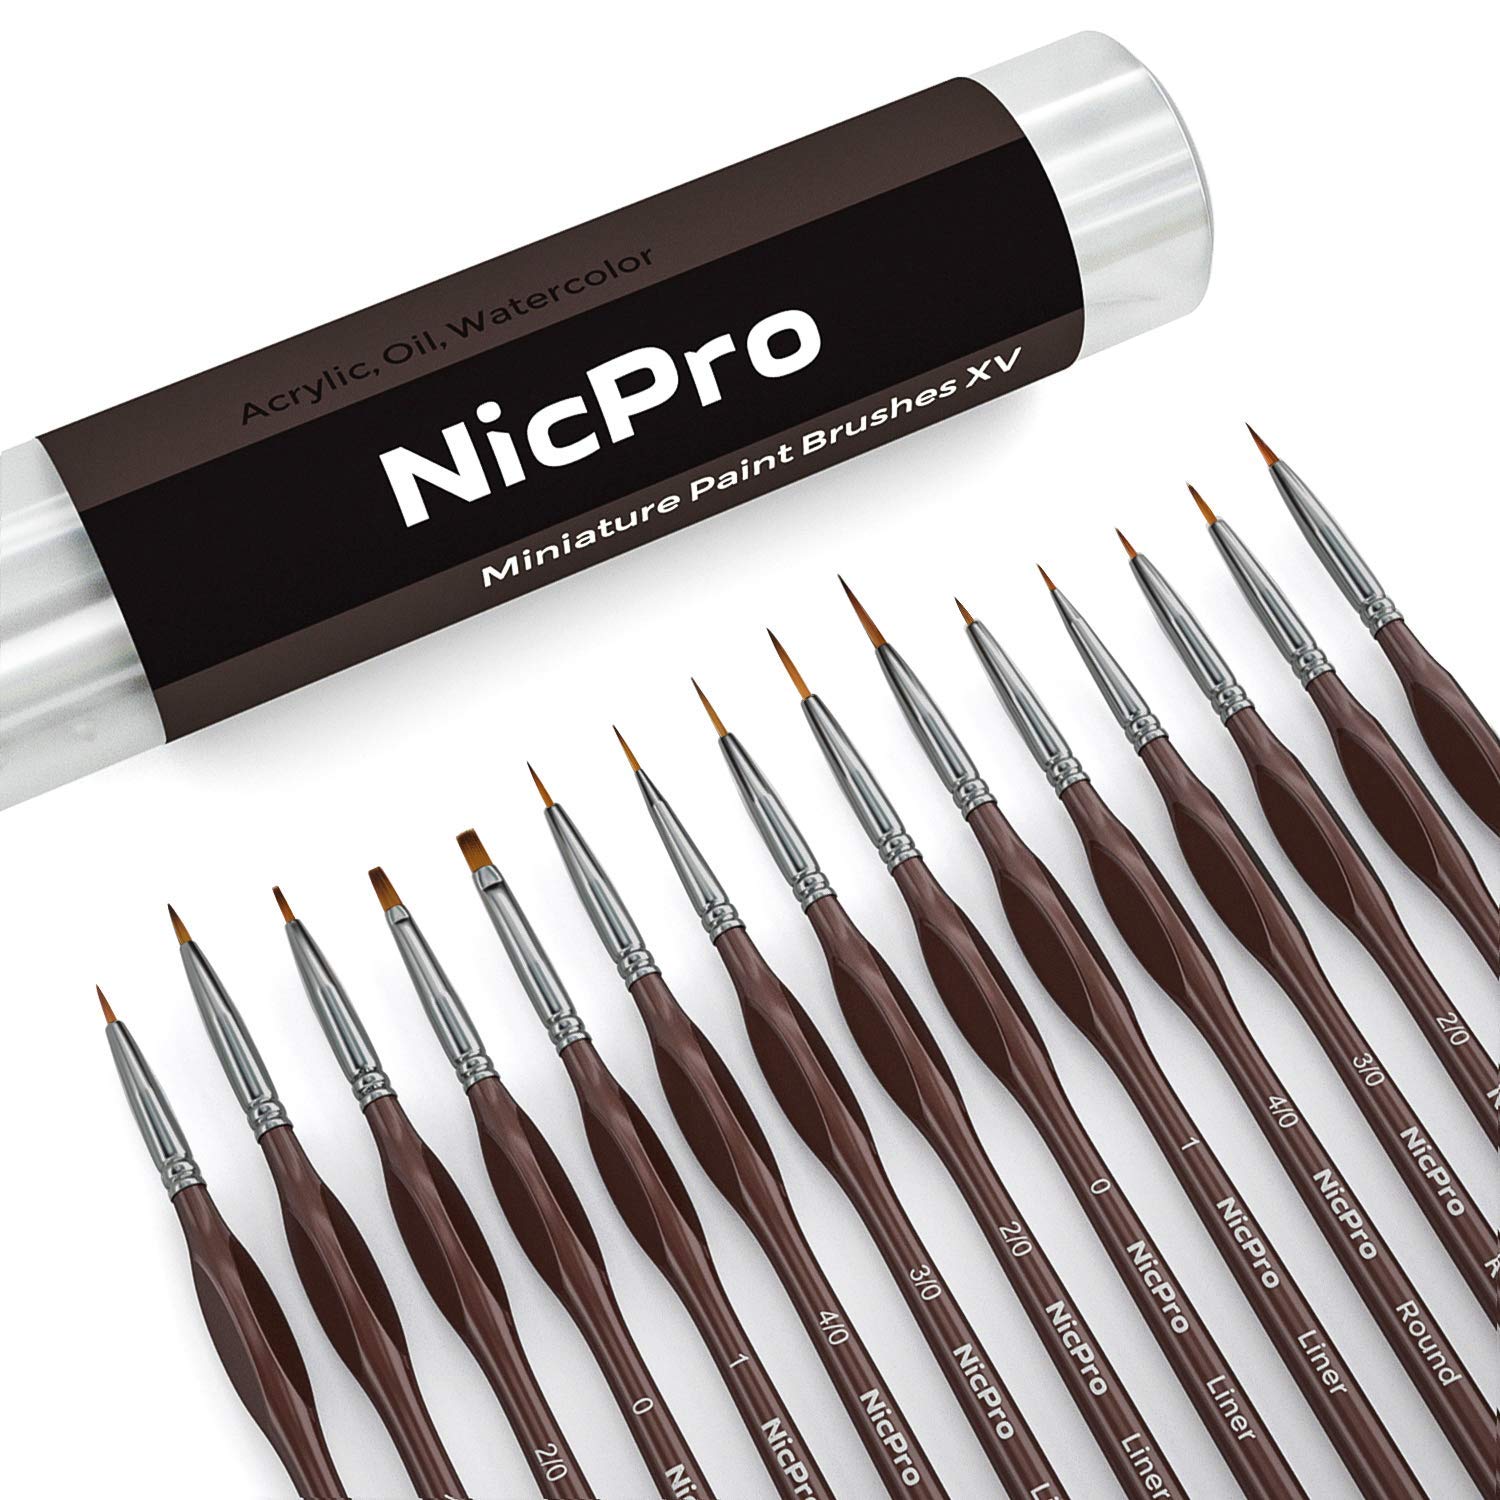 Nicpro Micro Detail Paint Brush Set 15 Small Professional Artist Miniature  Fine Detail Brushes for Art Watercolor Oil Acrylic Craft Models Rock  Painting Citadel & Paint by Number -Come with Holder Brown